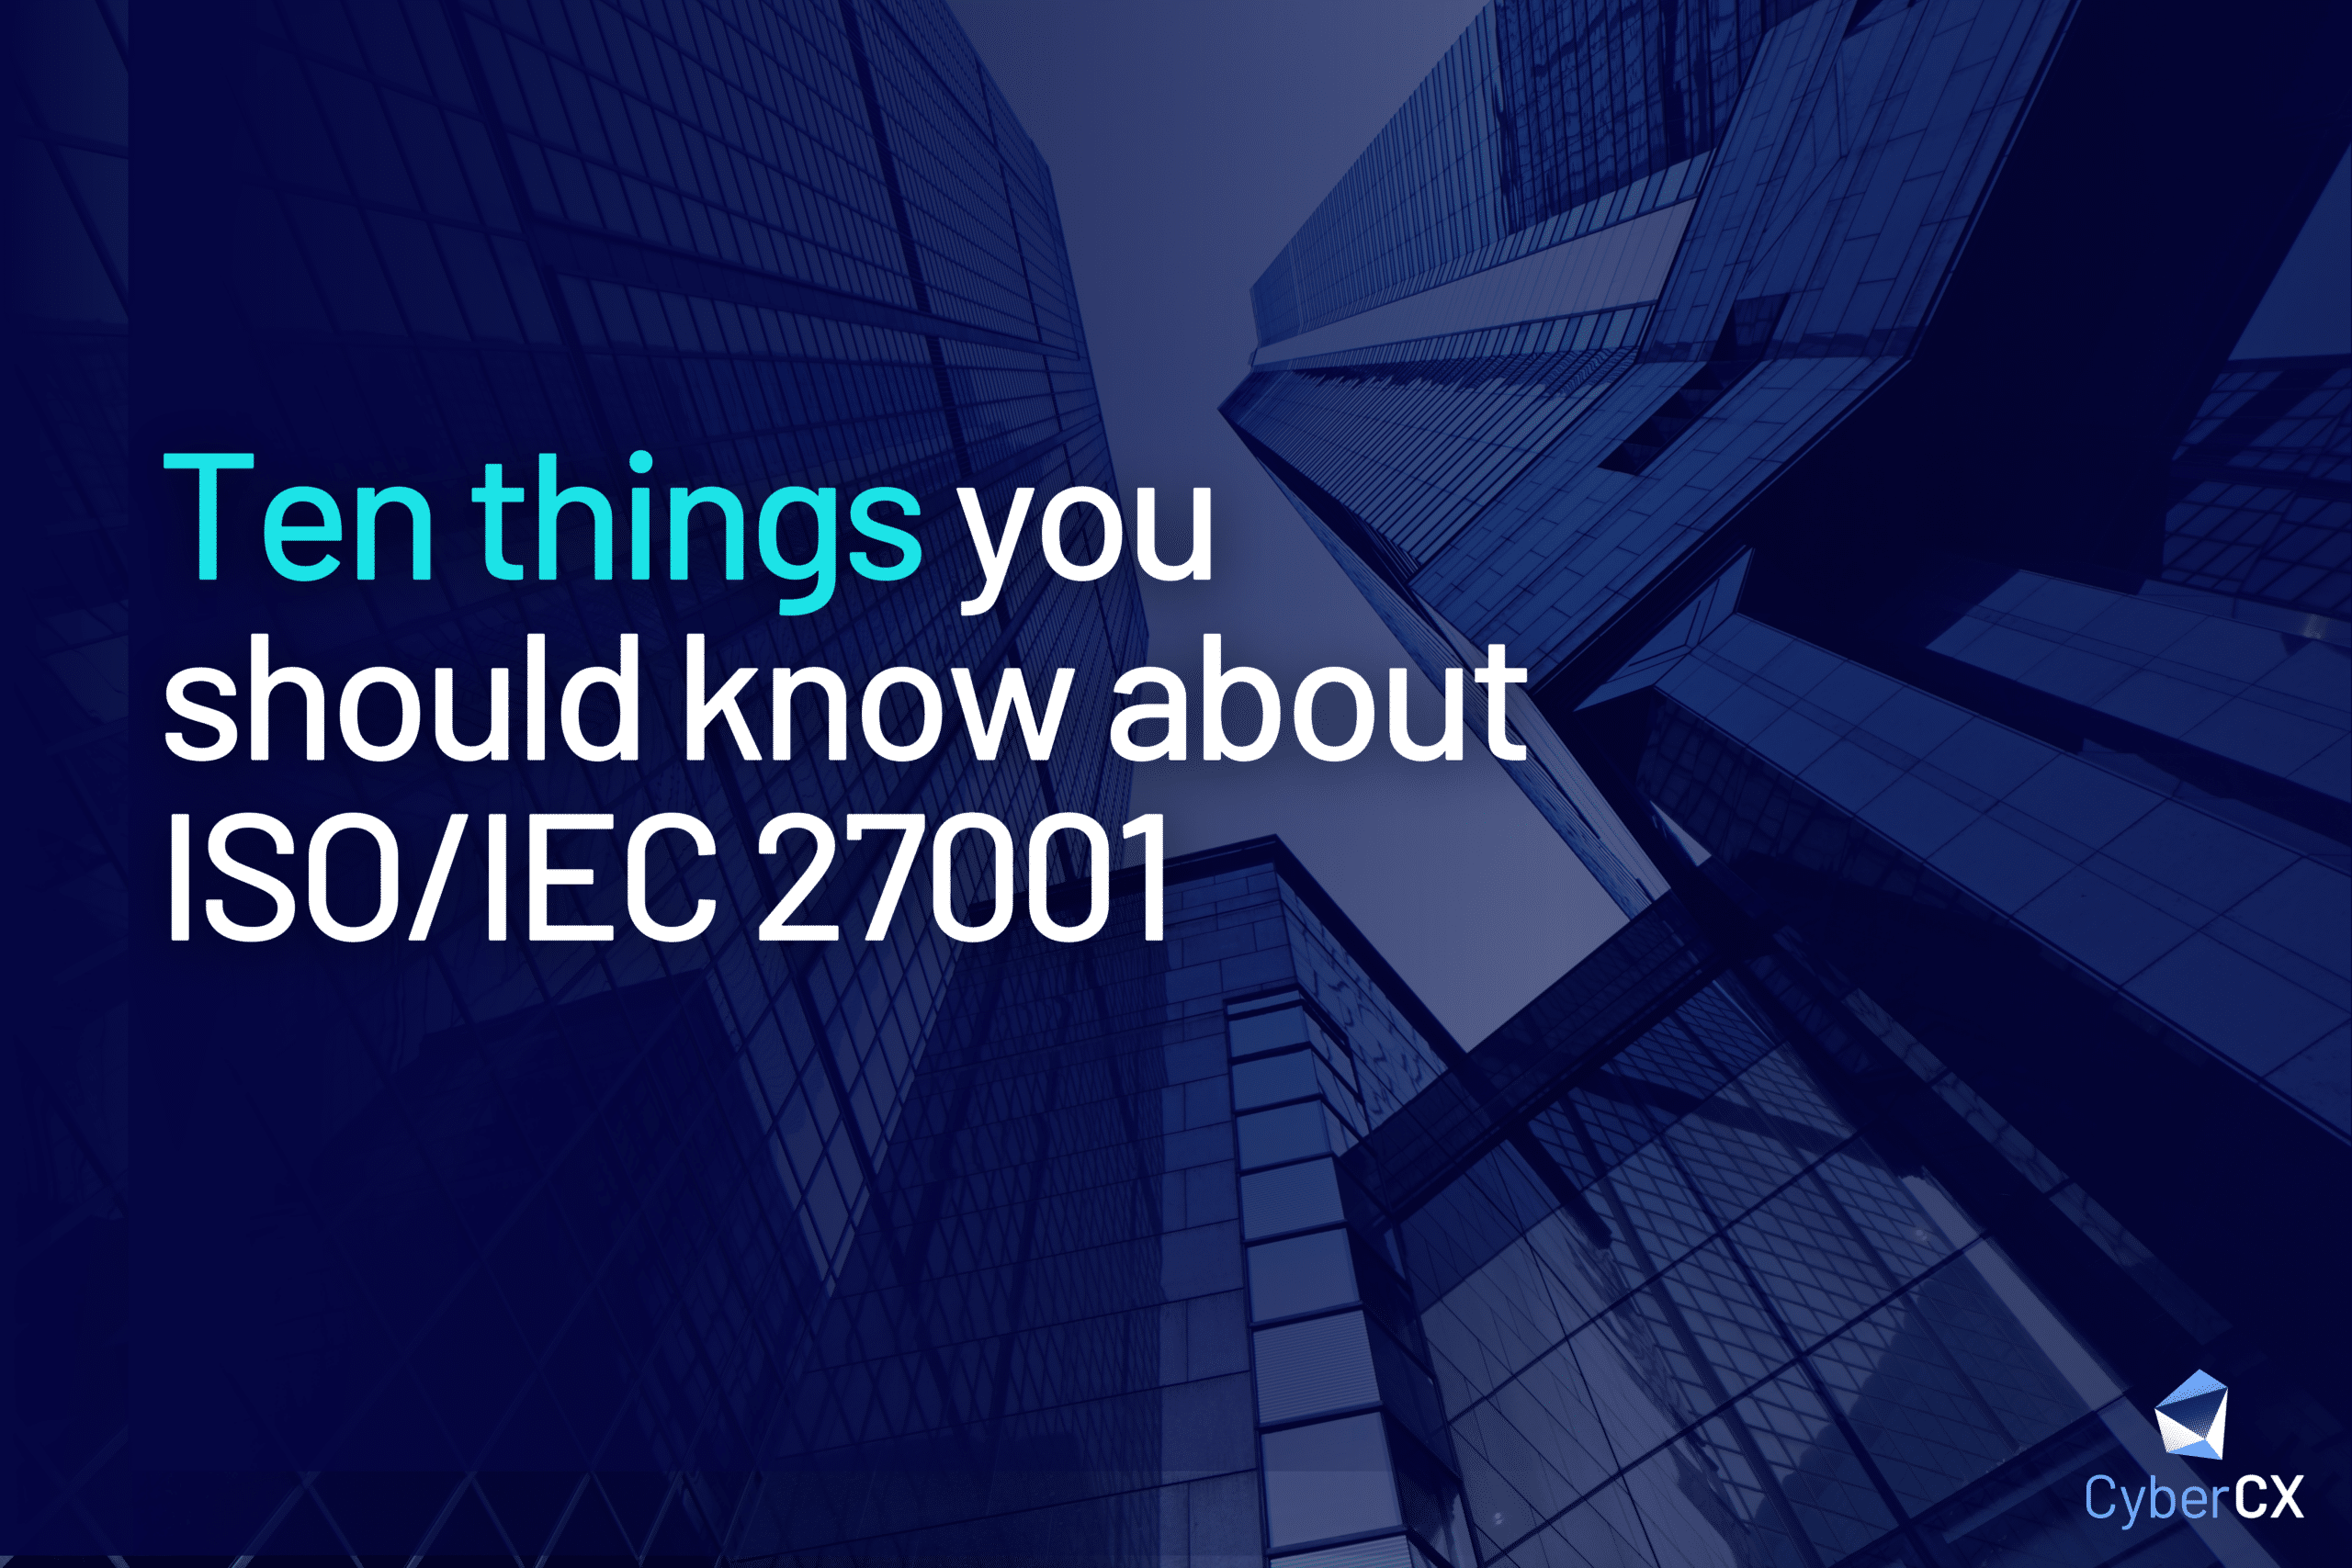 Ten things you should know about ISO/IEC 27001 | CyberCX